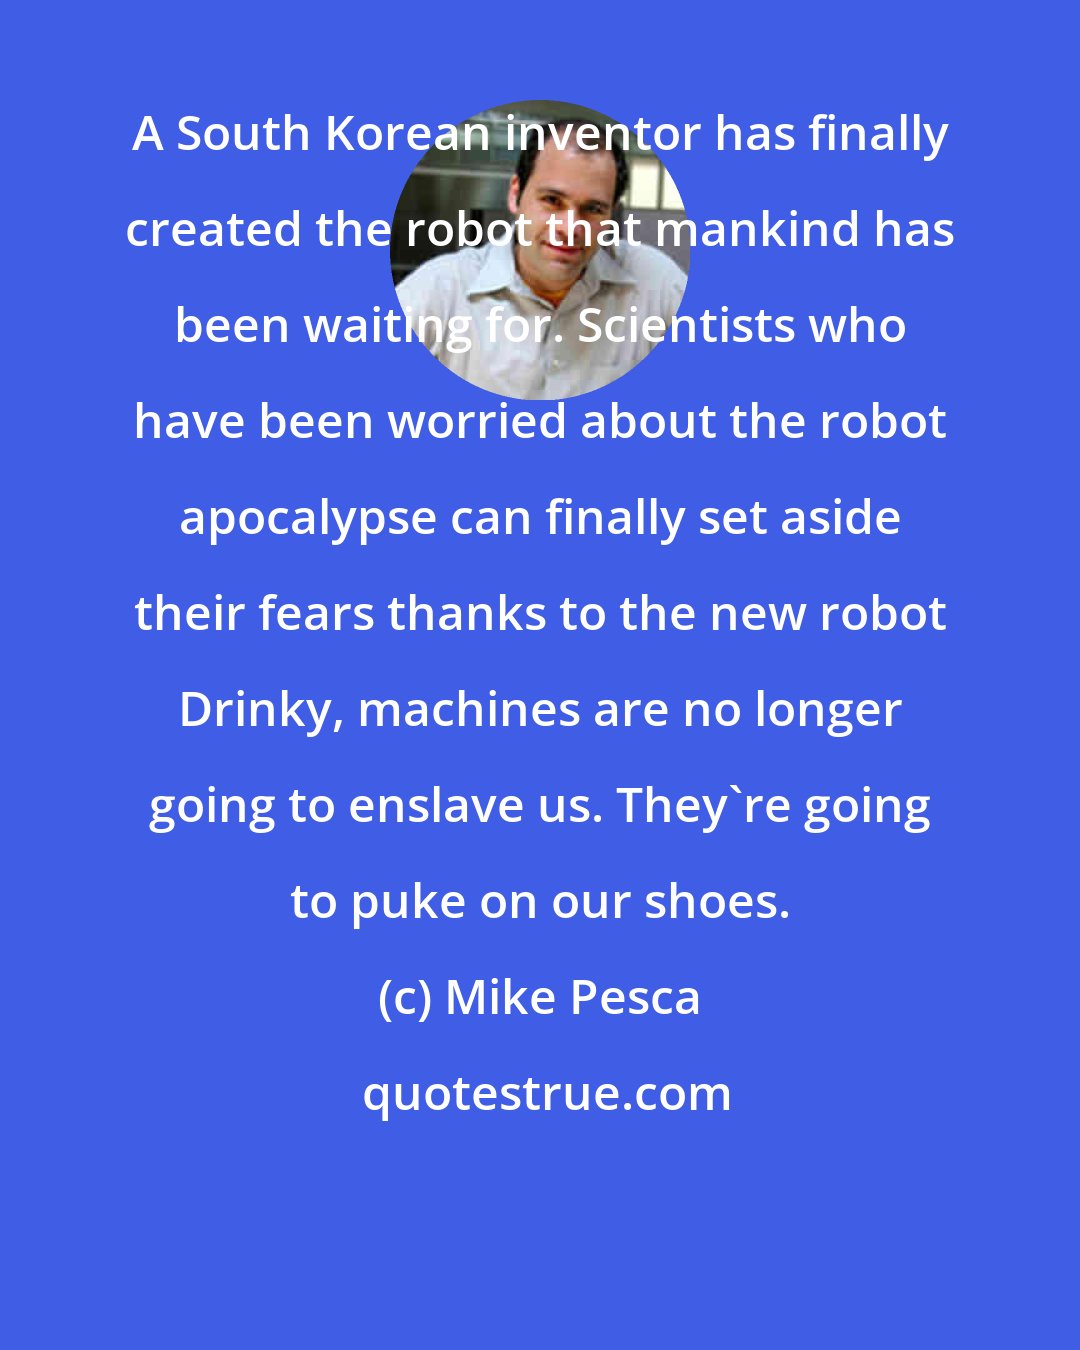 Mike Pesca: A South Korean inventor has finally created the robot that mankind has been waiting for. Scientists who have been worried about the robot apocalypse can finally set aside their fears thanks to the new robot Drinky, machines are no longer going to enslave us. They're going to puke on our shoes.